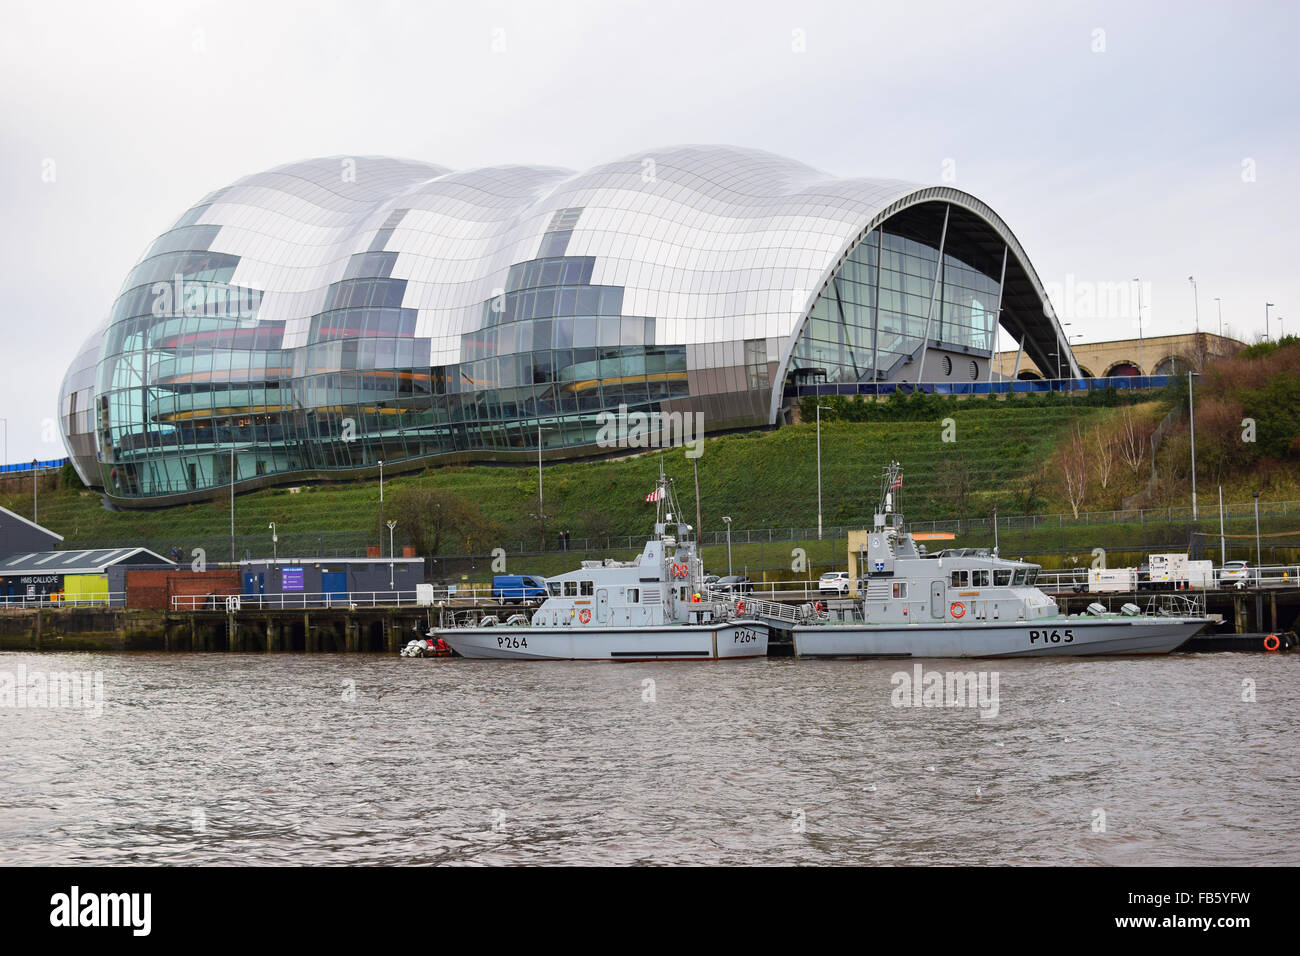 The Sage concert venue and music centre in Gateshead, on the banks of the river Tyne, North East England. Stock Photo